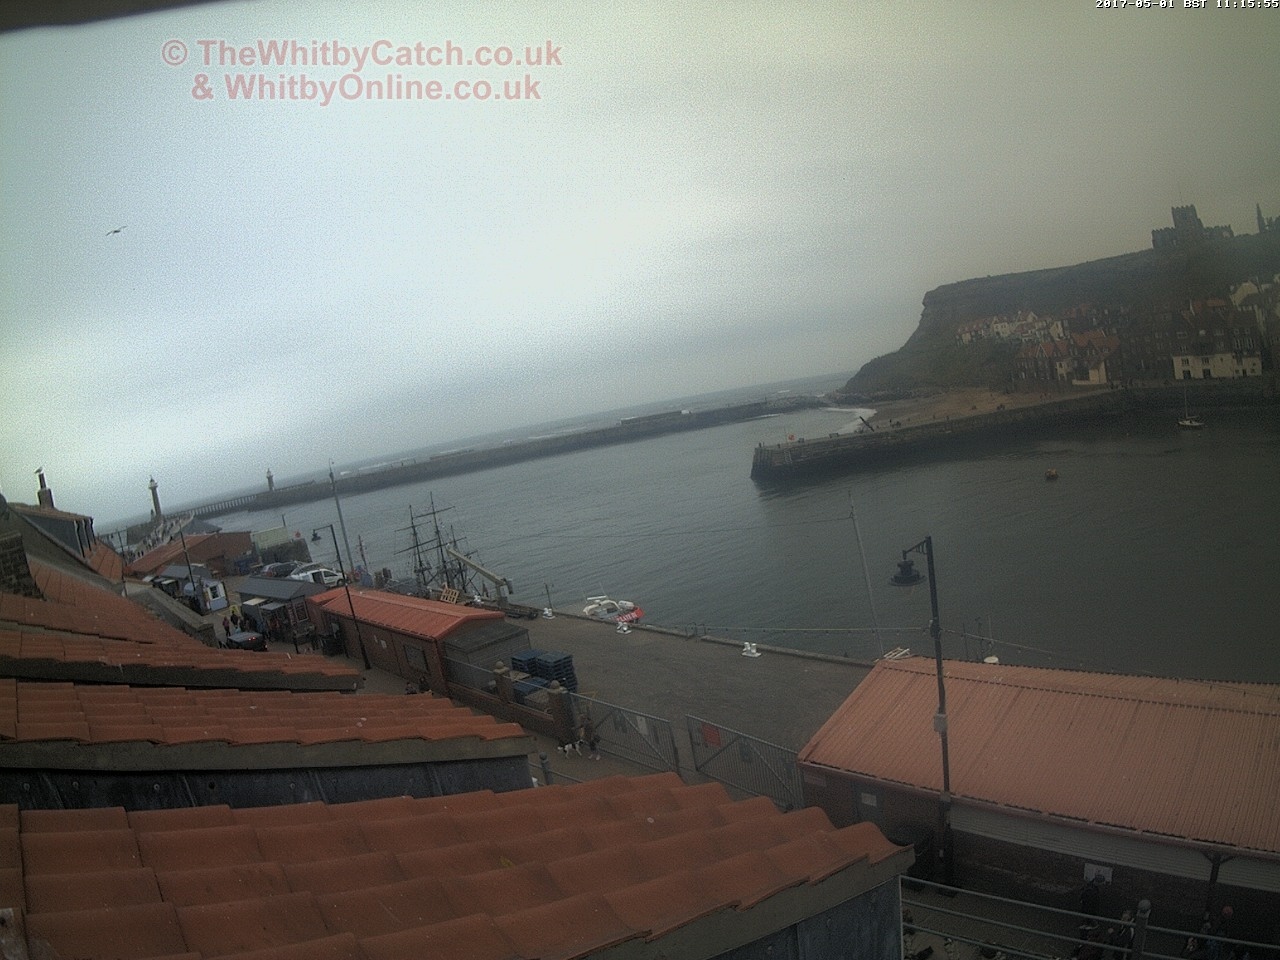 Whitby Mon 1st May 2017 11:16.